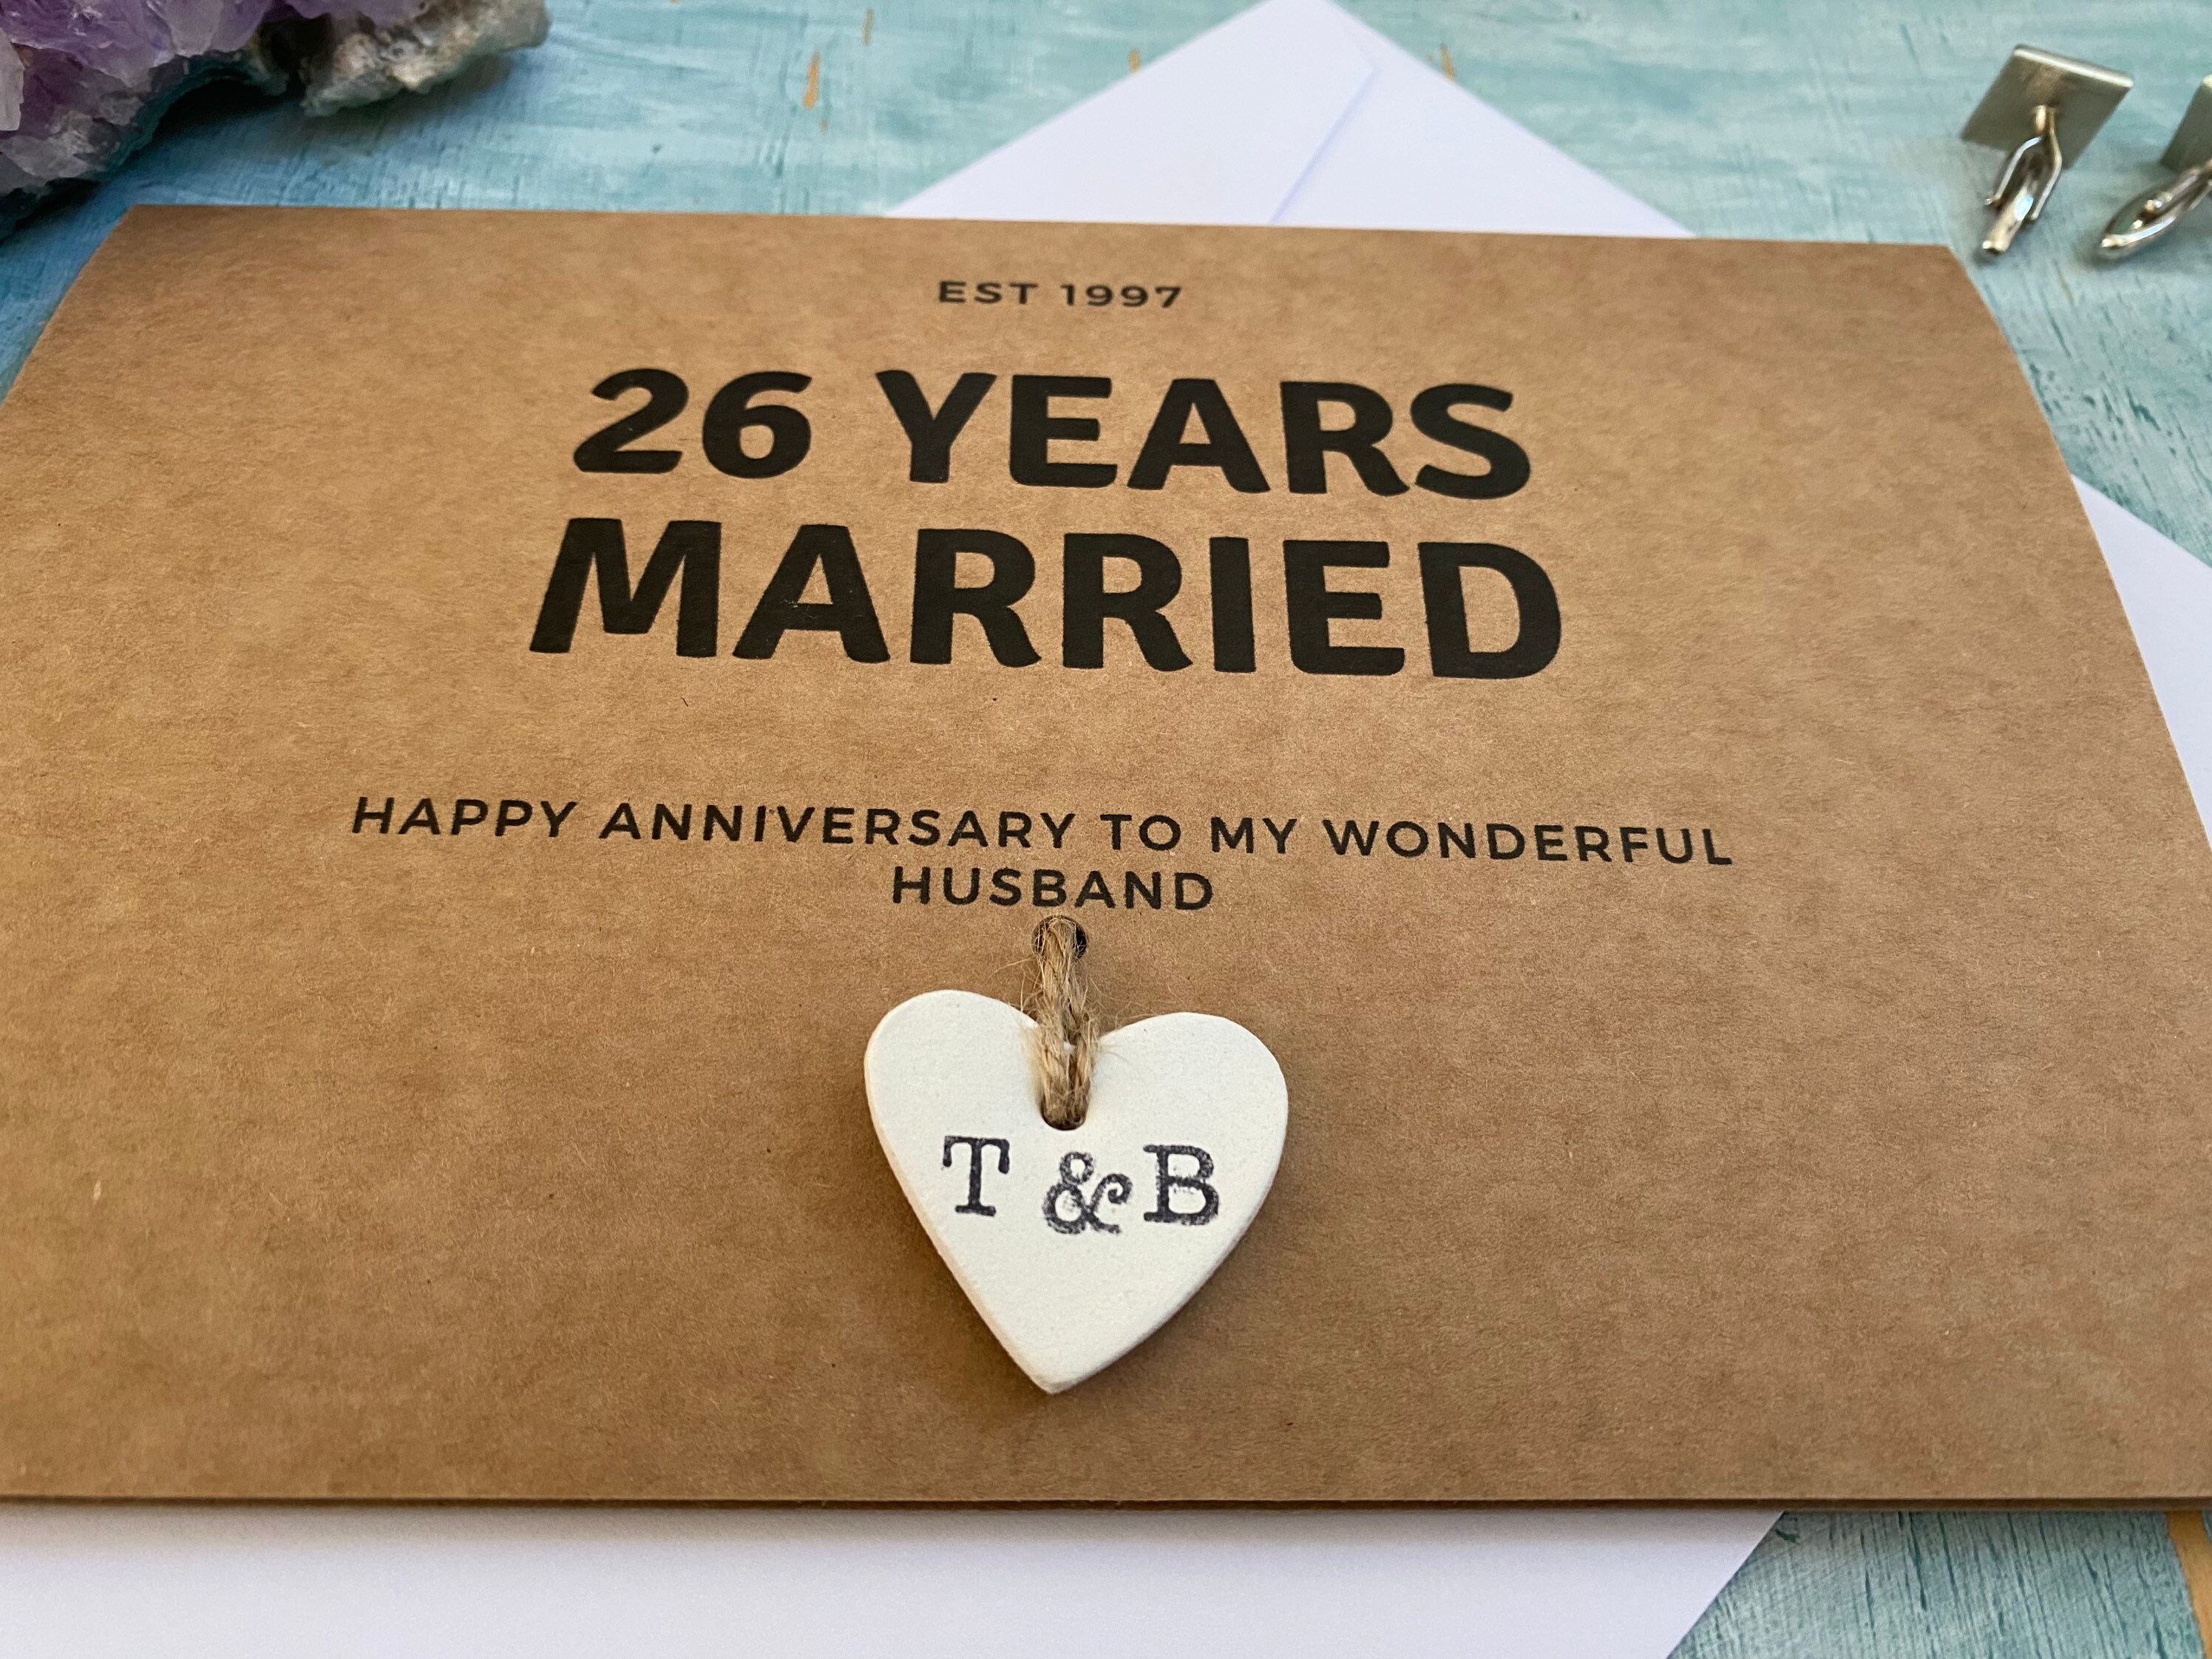 29 Reasons Why I Love You Mini Book of Love Notes Long 